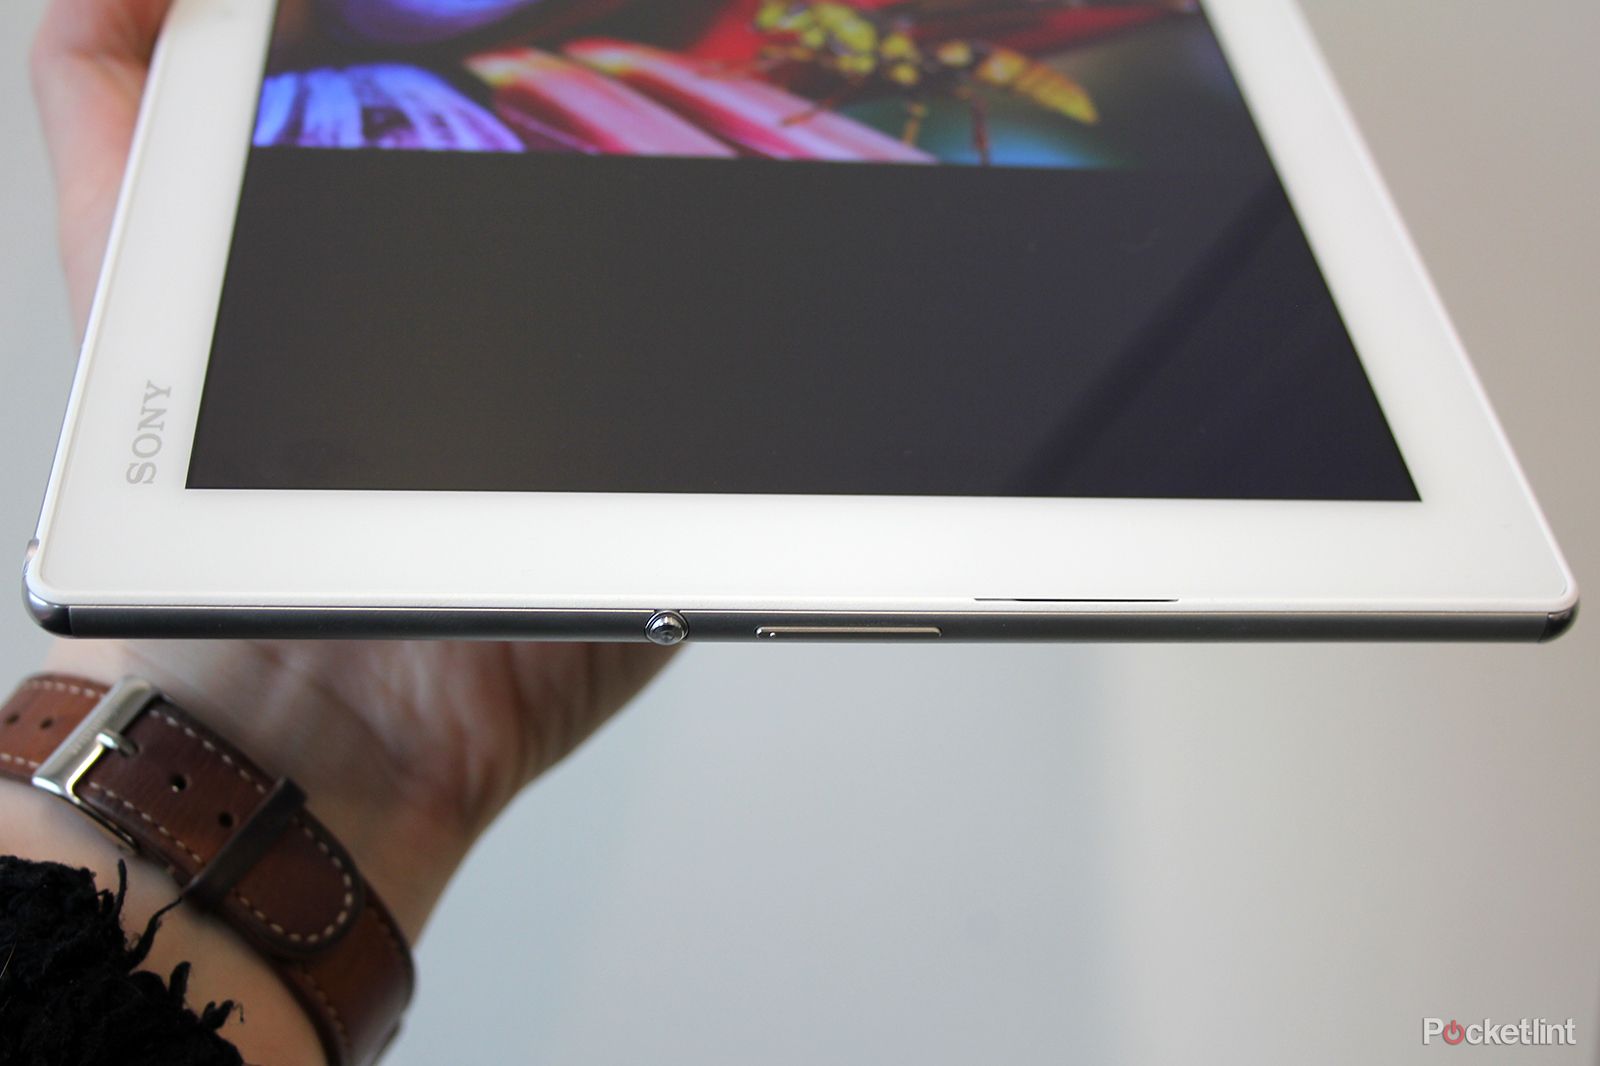 sony xperia z4 tablet hands on slimmer lighter and sexier image 19